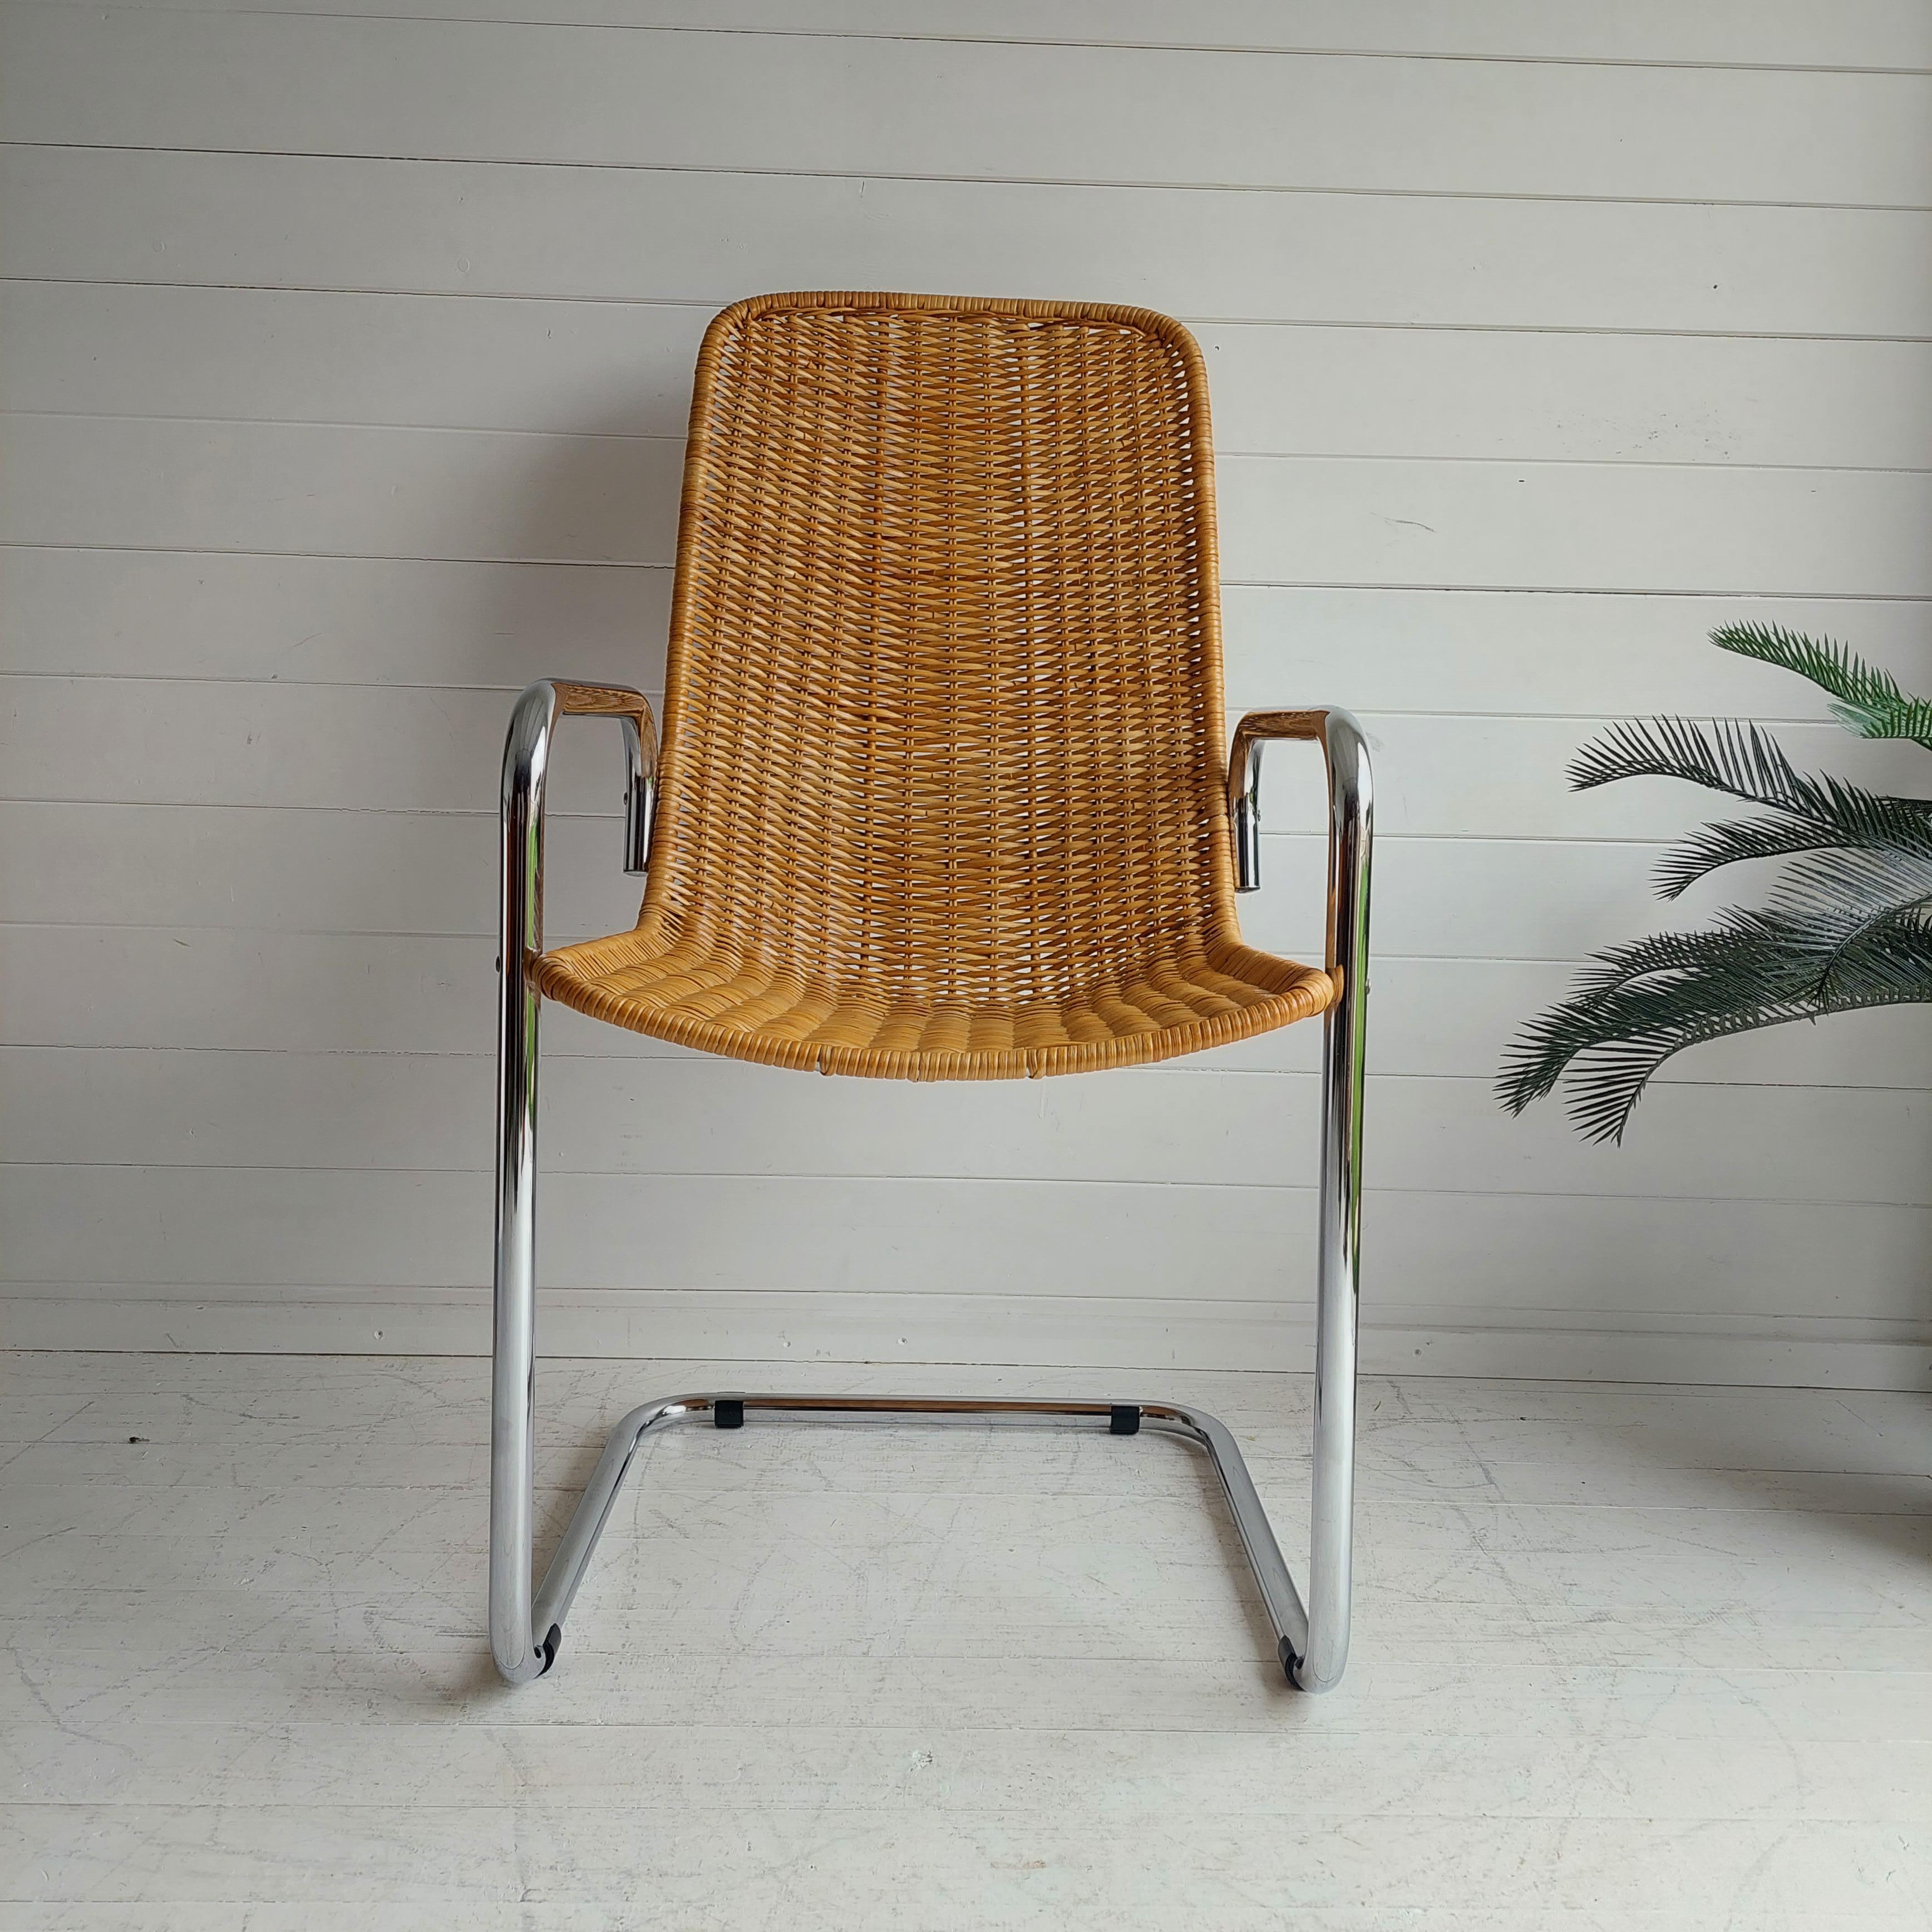 20th Century Mid Century Chrome and Rattan Chair Cantilever Breuer MR20 Style Wicker, 1970s